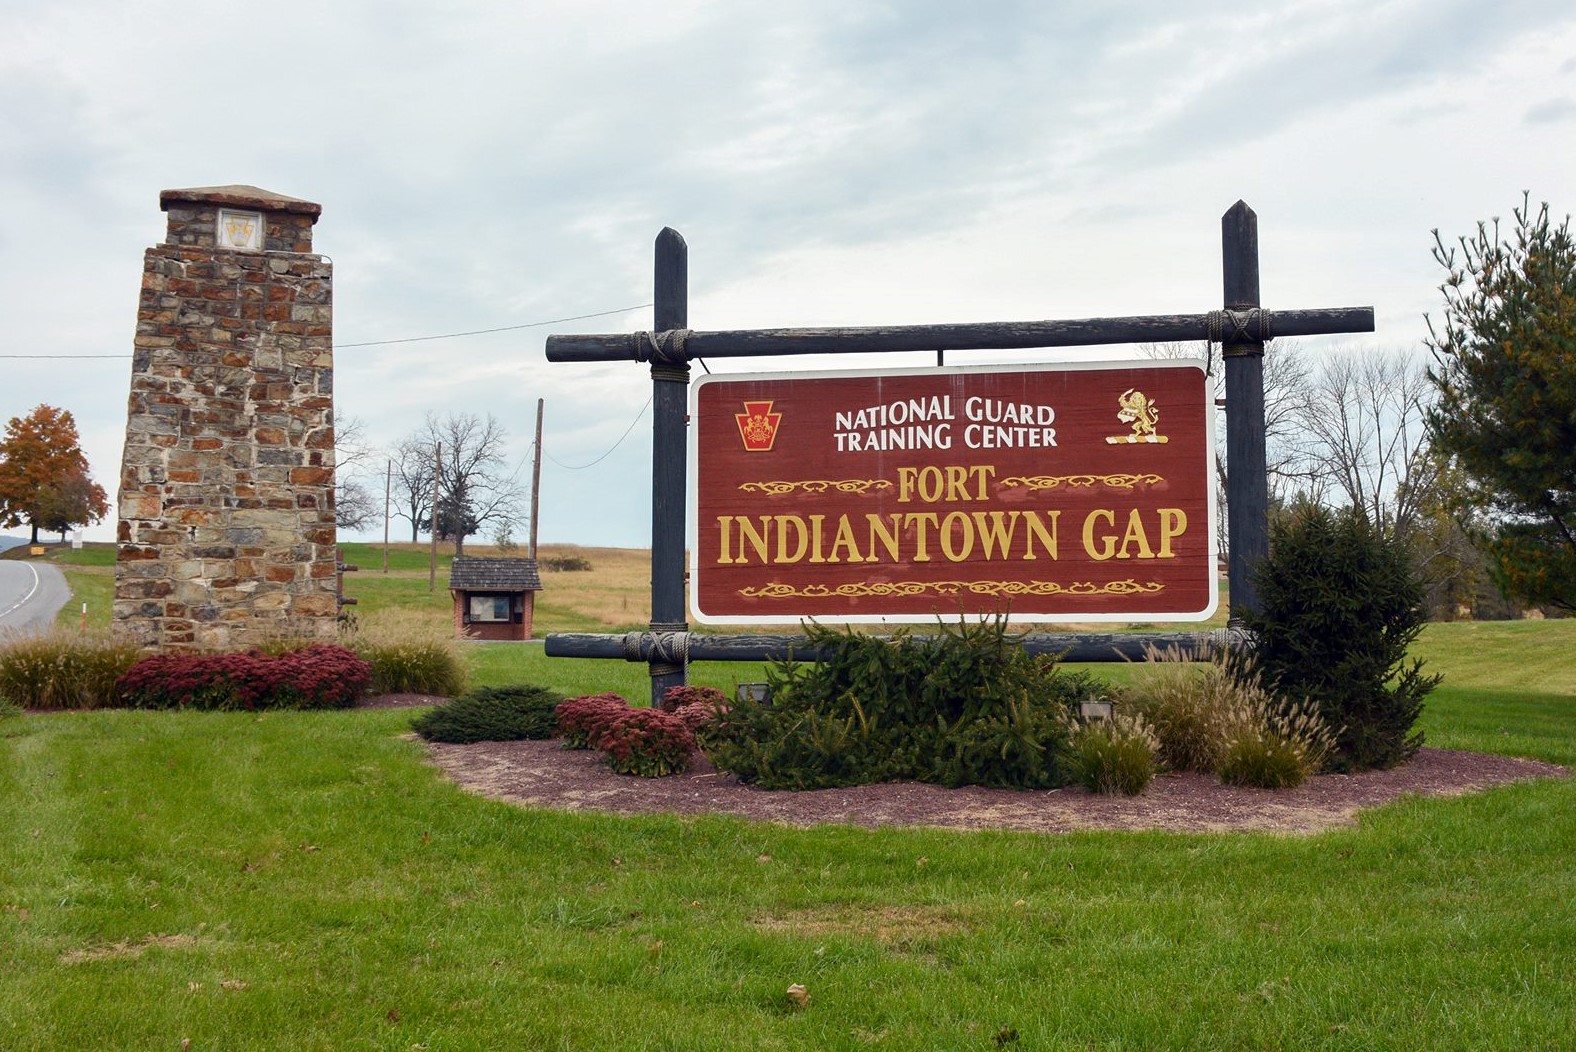 The Best time to visit Fort Indiantown Gap, and things to do in Fort Indiantown Gap